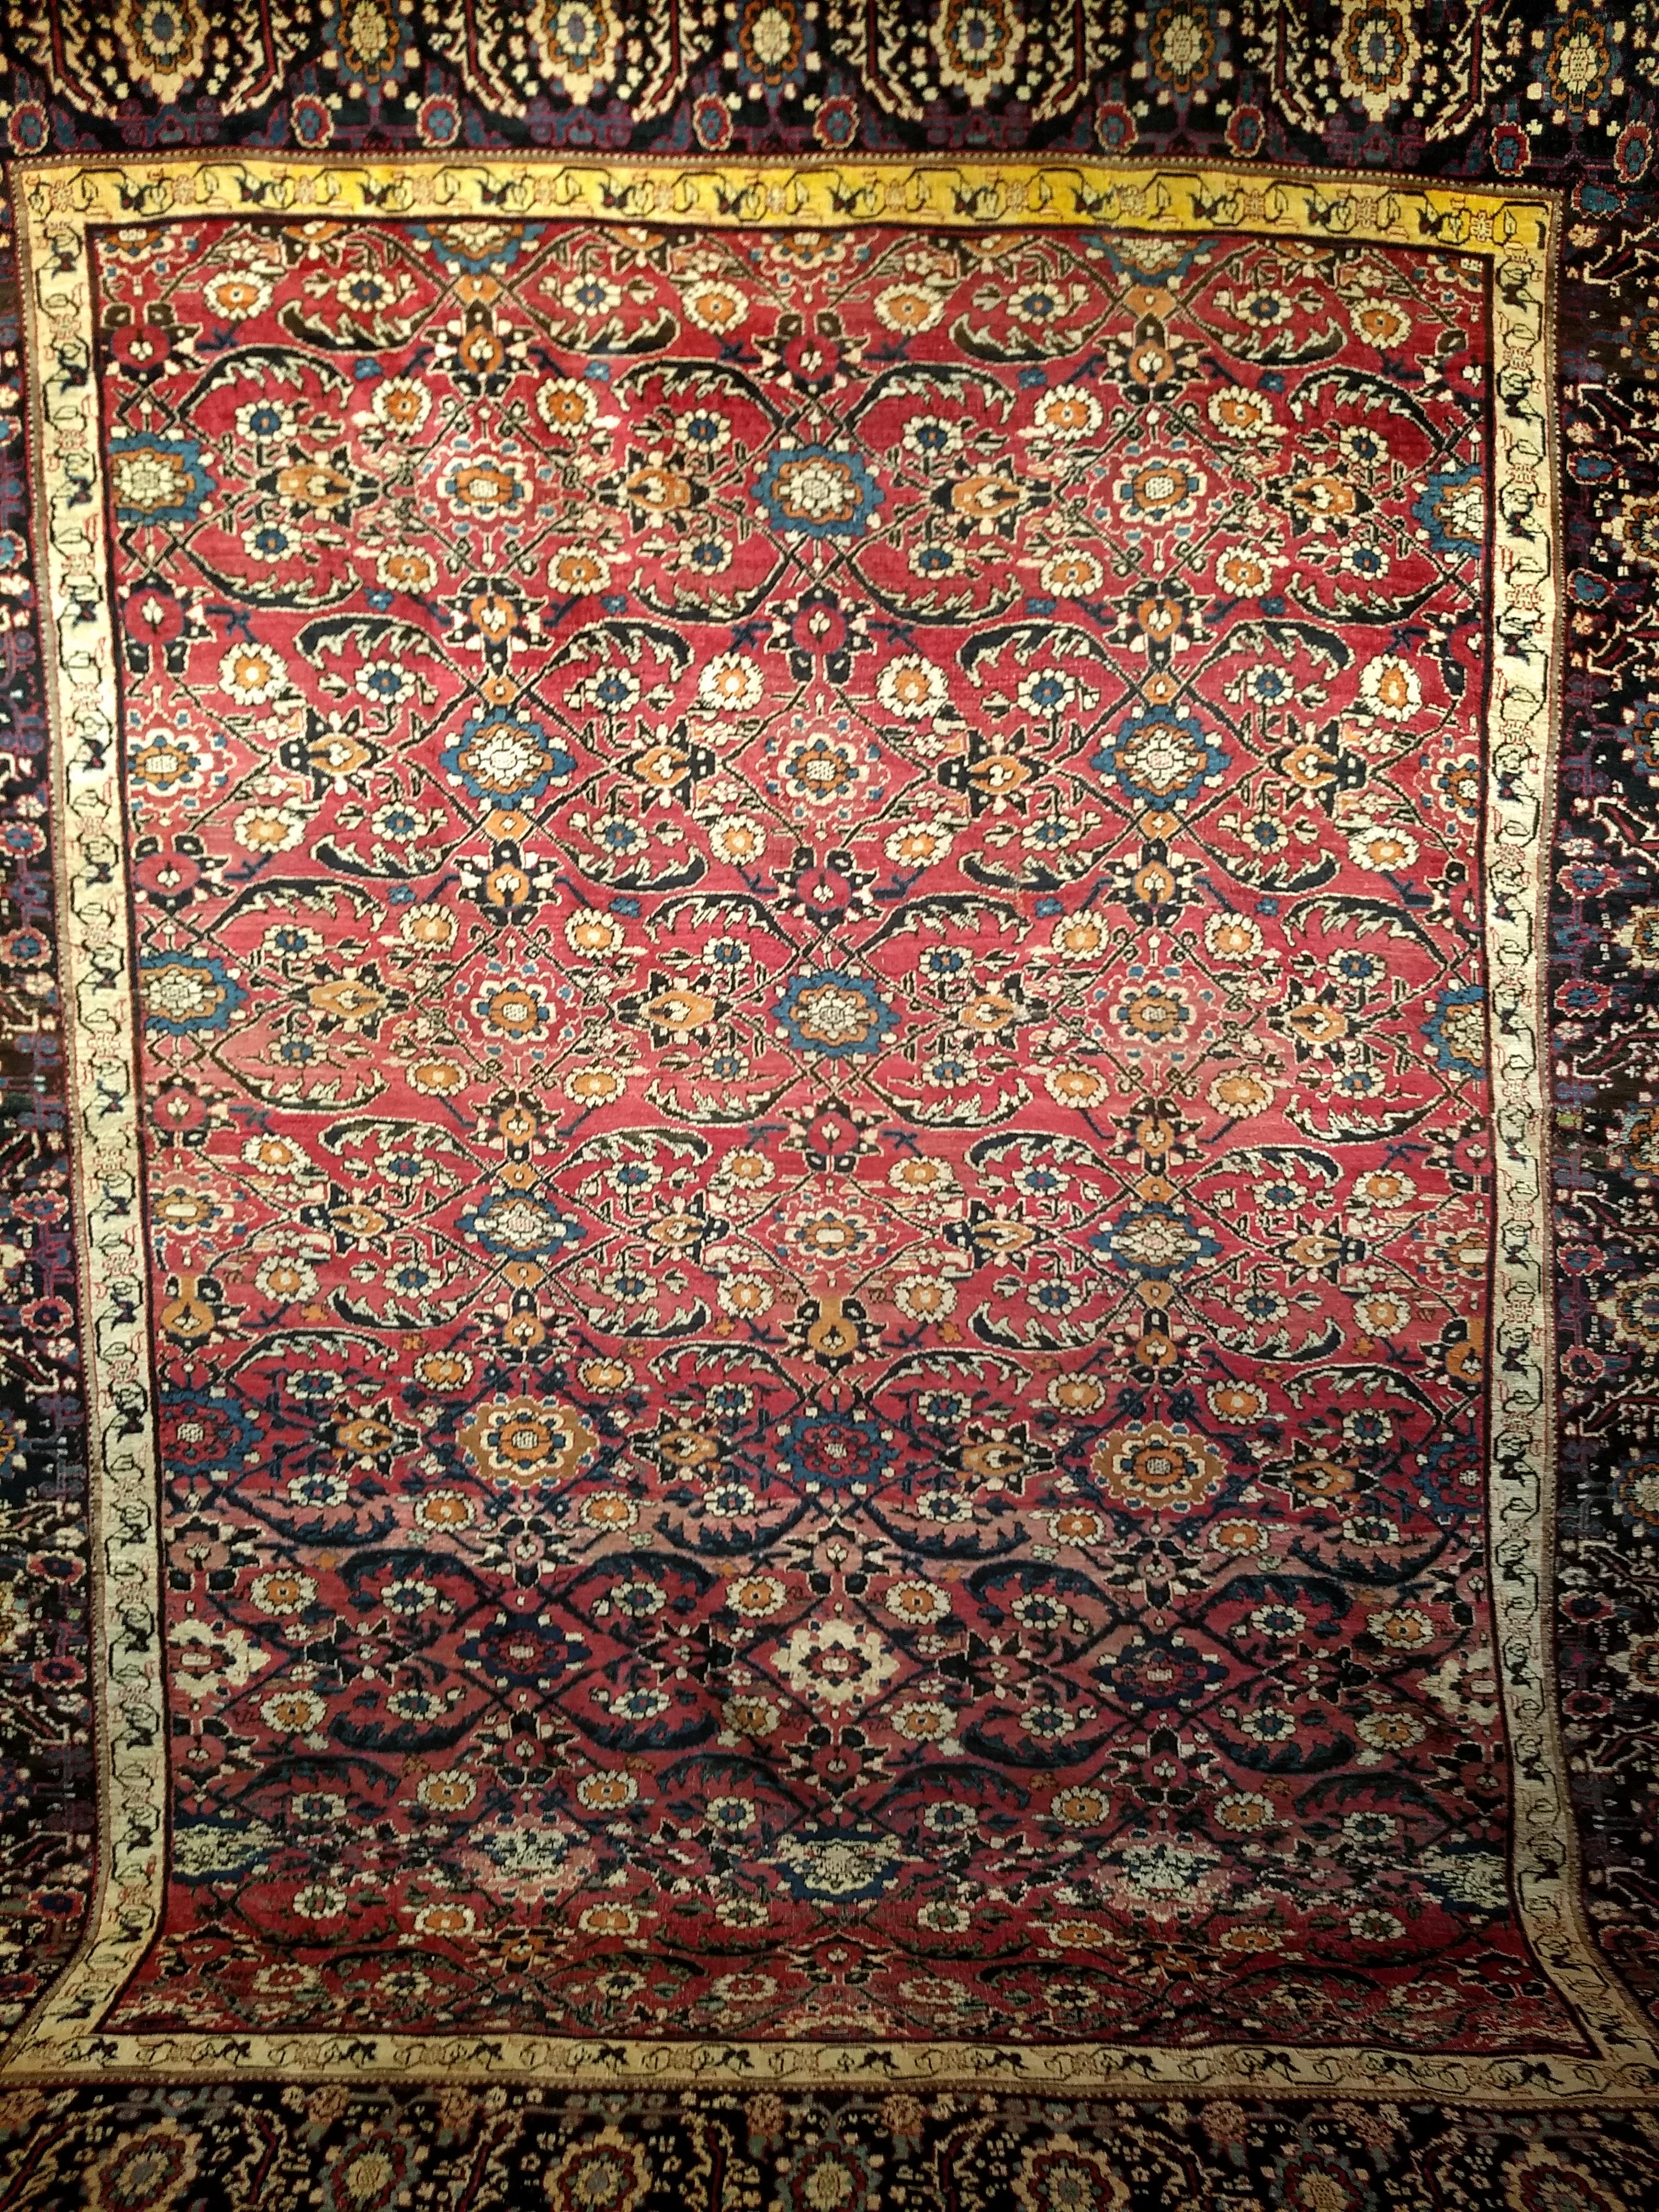 Beautiful antique Ziegler Mahal Sultanabad carpet from the last quarter of the 1800s. It has an all-over pattern in an abrash dark red or burgundy color field that contains a large geometric pattern similar to the 19th century Persian Bidjar and